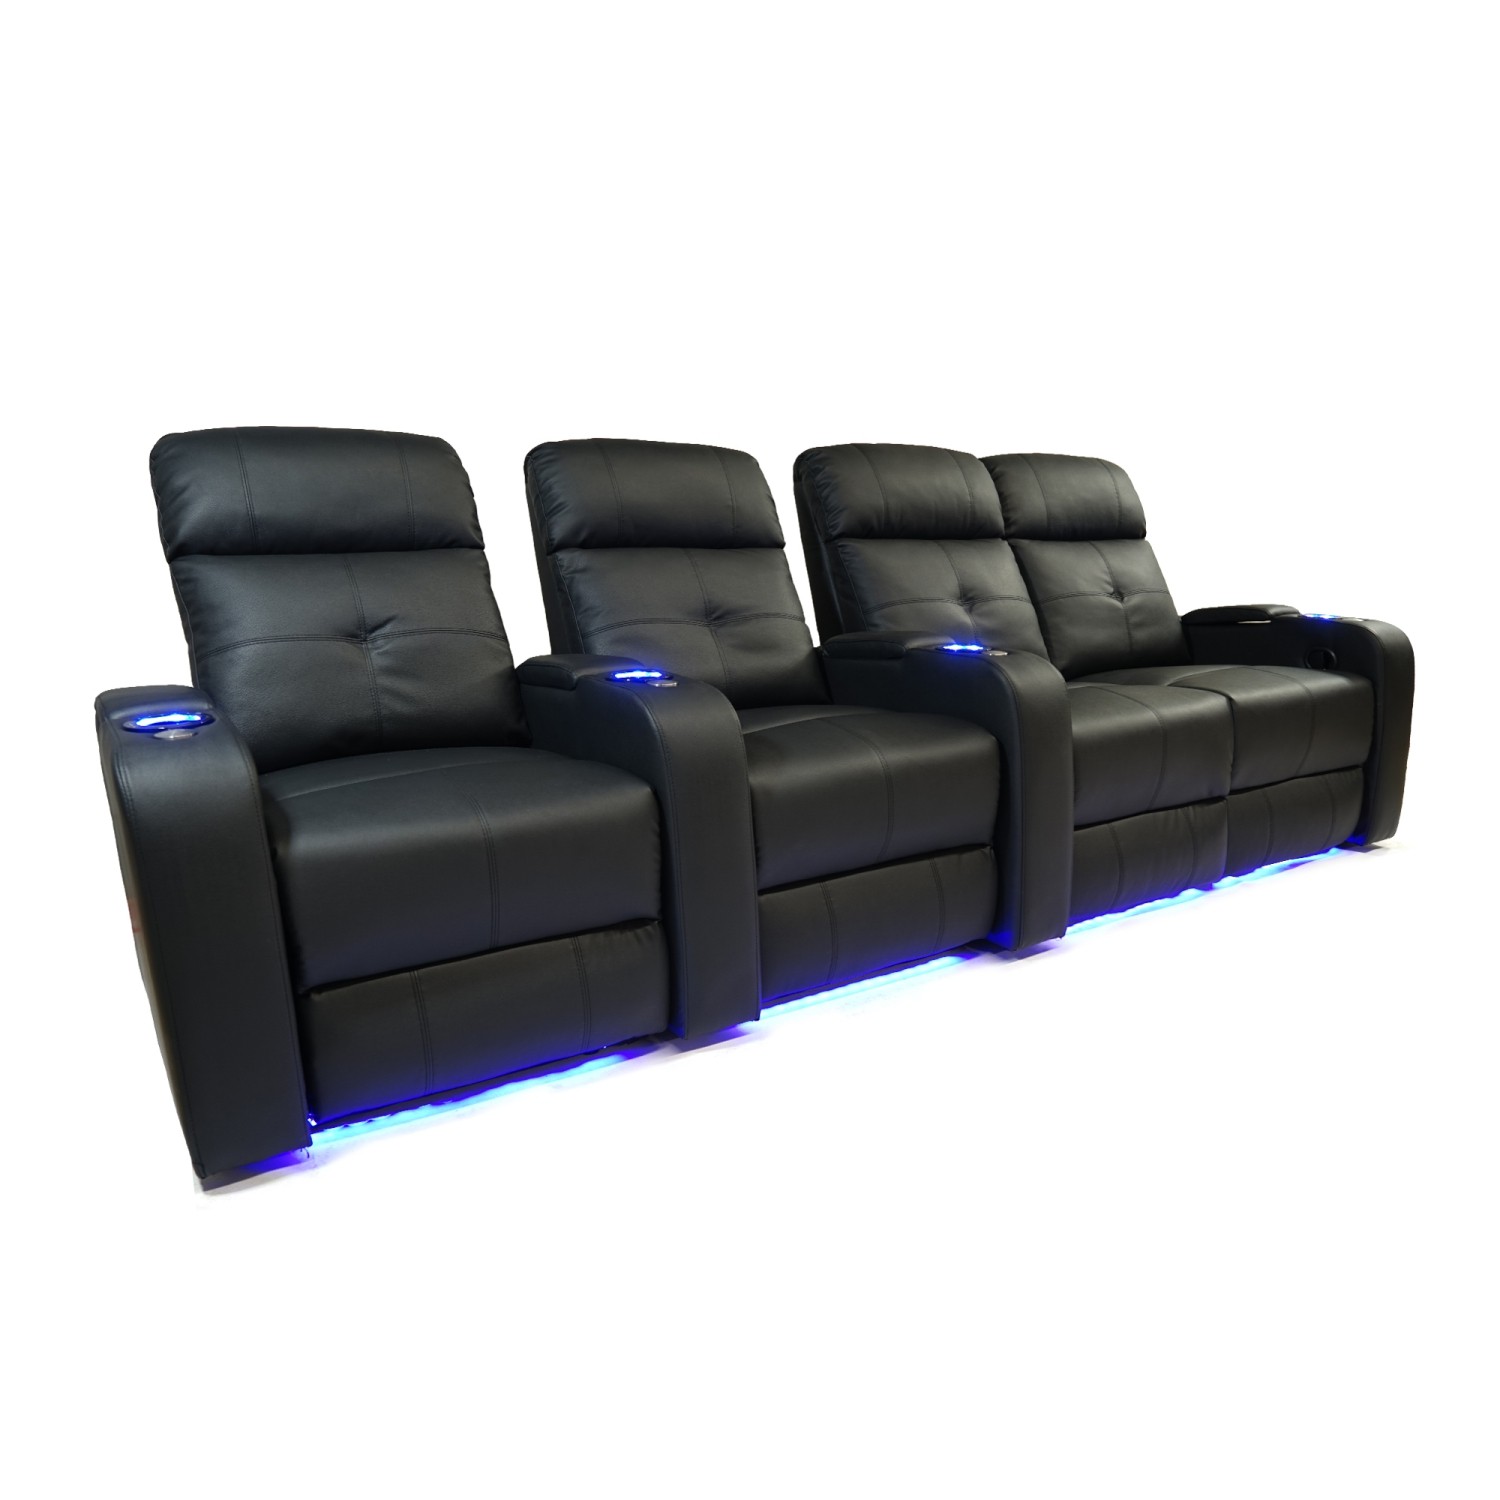 Valencia Verona Motorized Home Theater, Leather Theatre Seating For Home